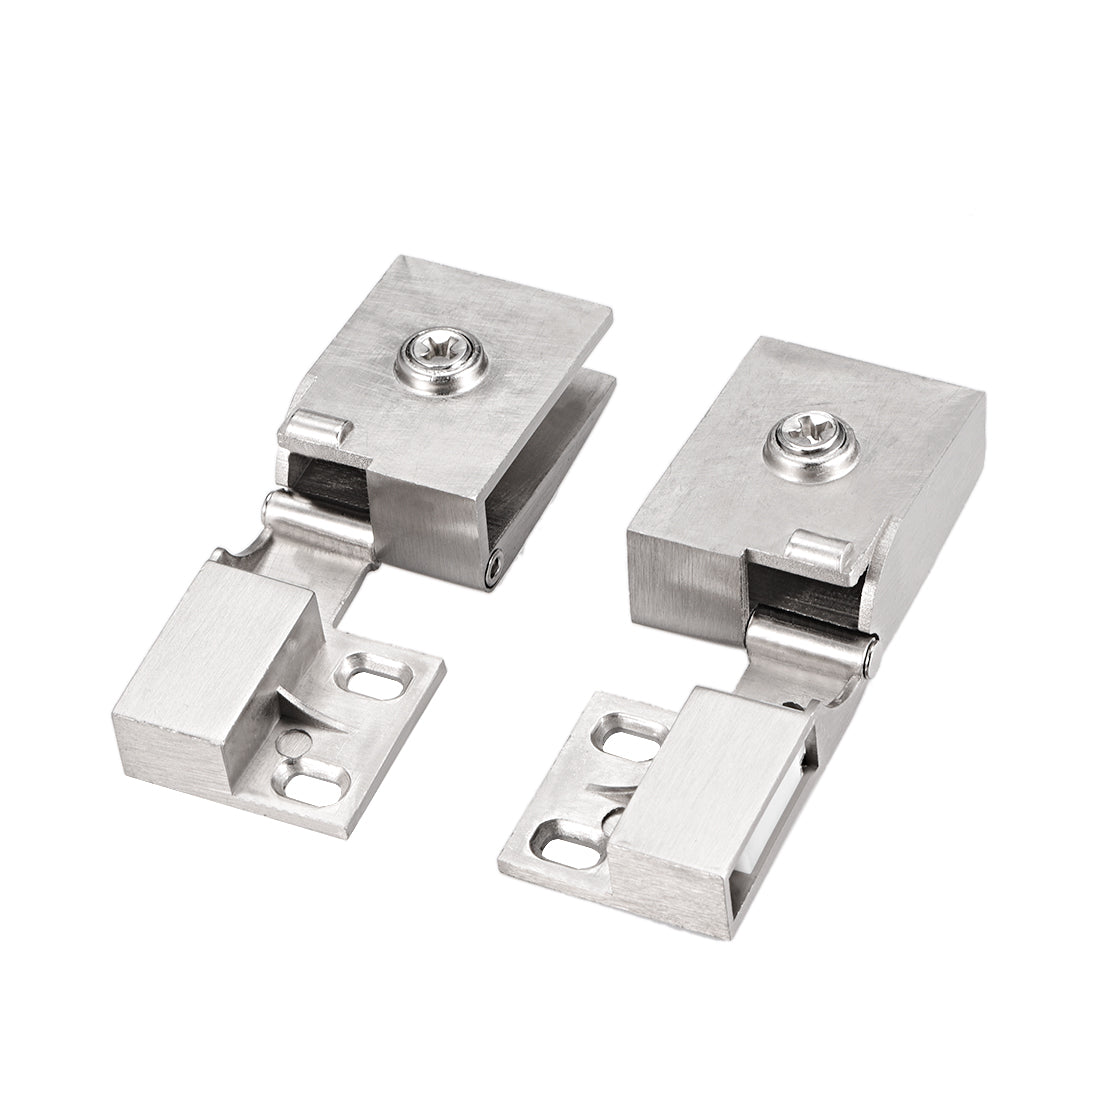 uxcell Uxcell 2Pair Glass Door Hinge Cupboard Showcase Cabinet Door Hinge Glass Clamp , Zinc Alloy , for 3-5mm Glass Thickness